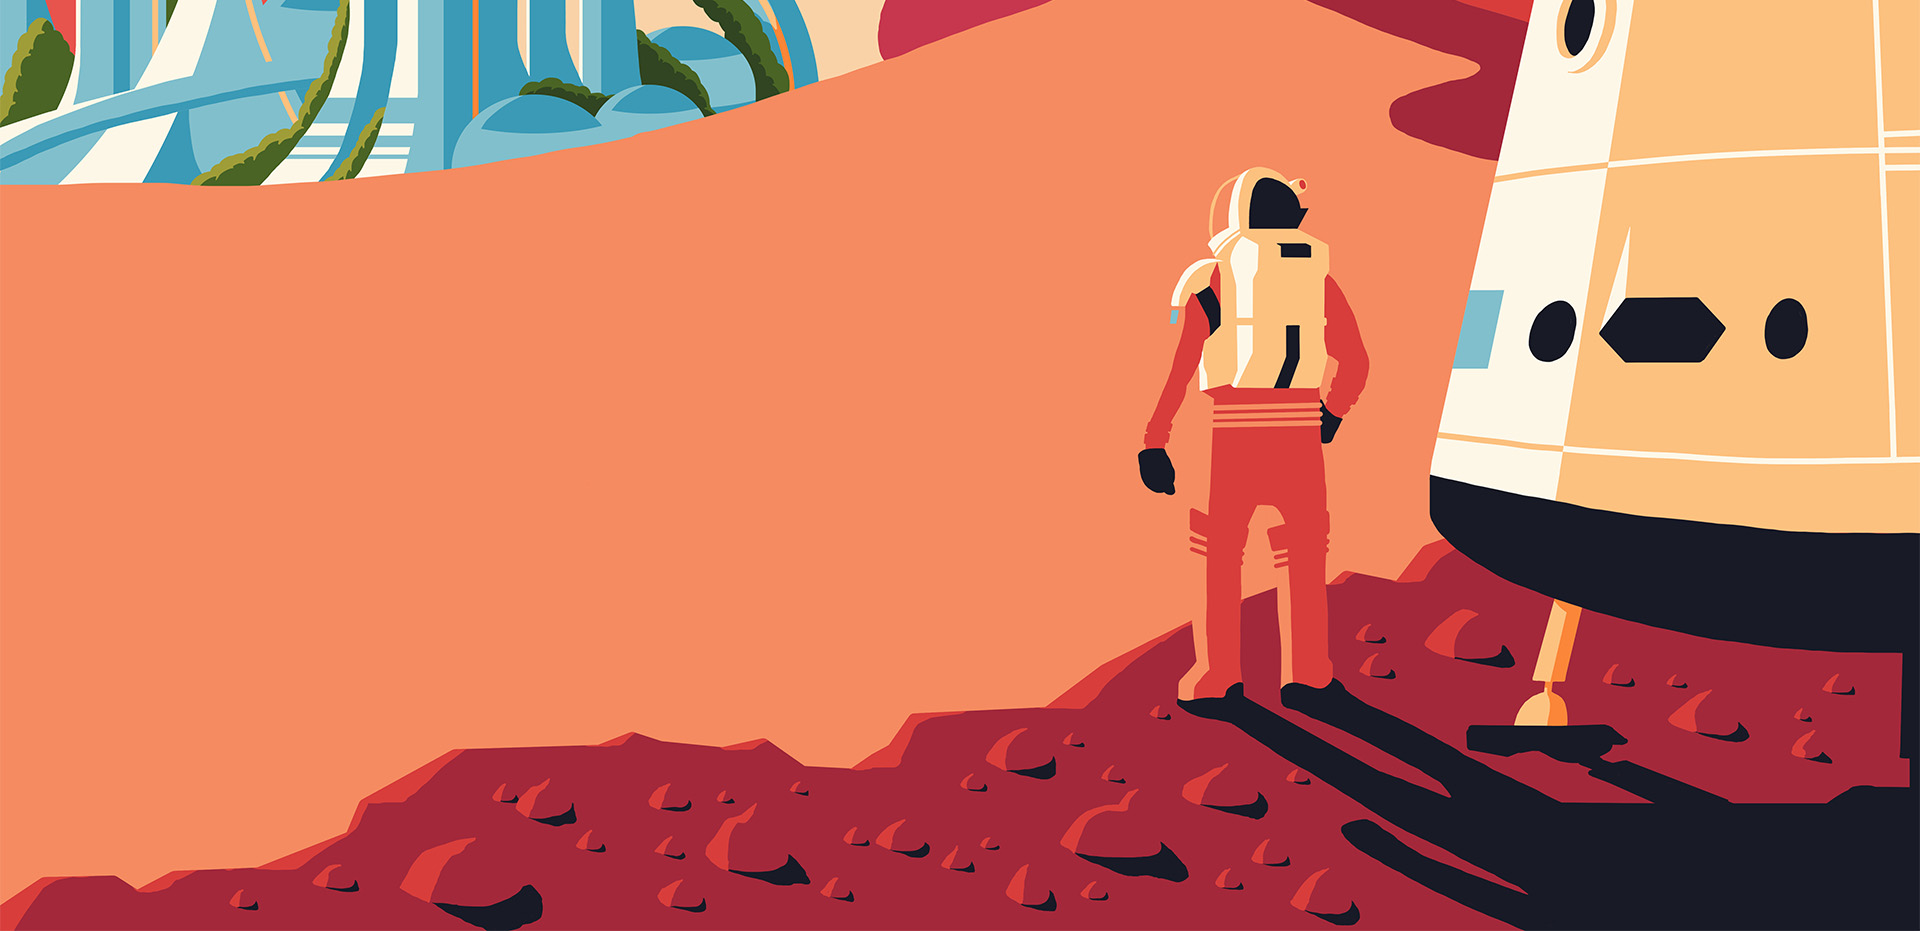 Illustration detail of an astronaut who just landed on a new planet